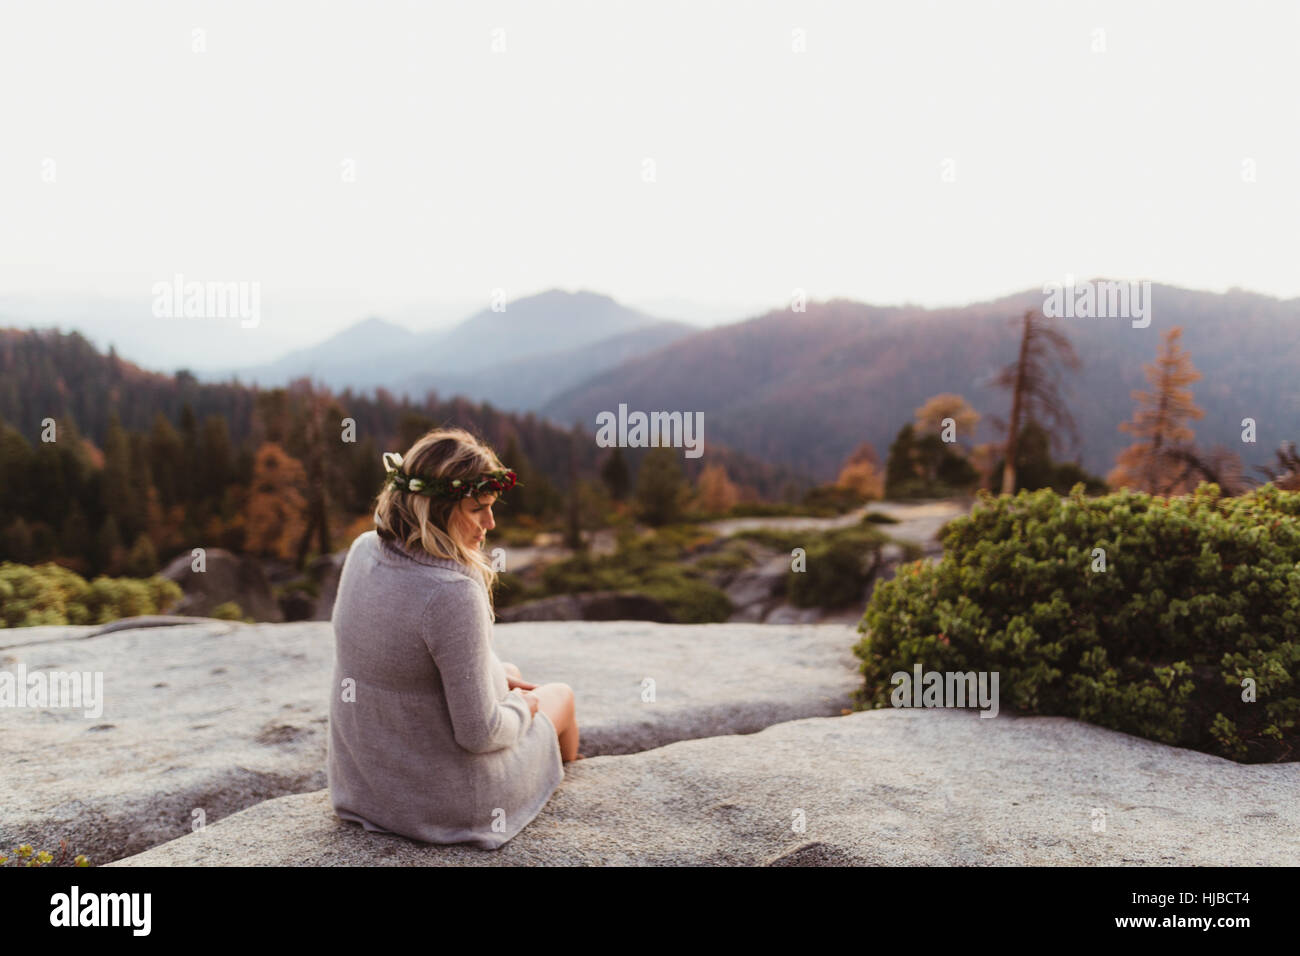 Rear view of woman sitting on rocks in mountains, Sequoia national park, California, USA Stock Photo